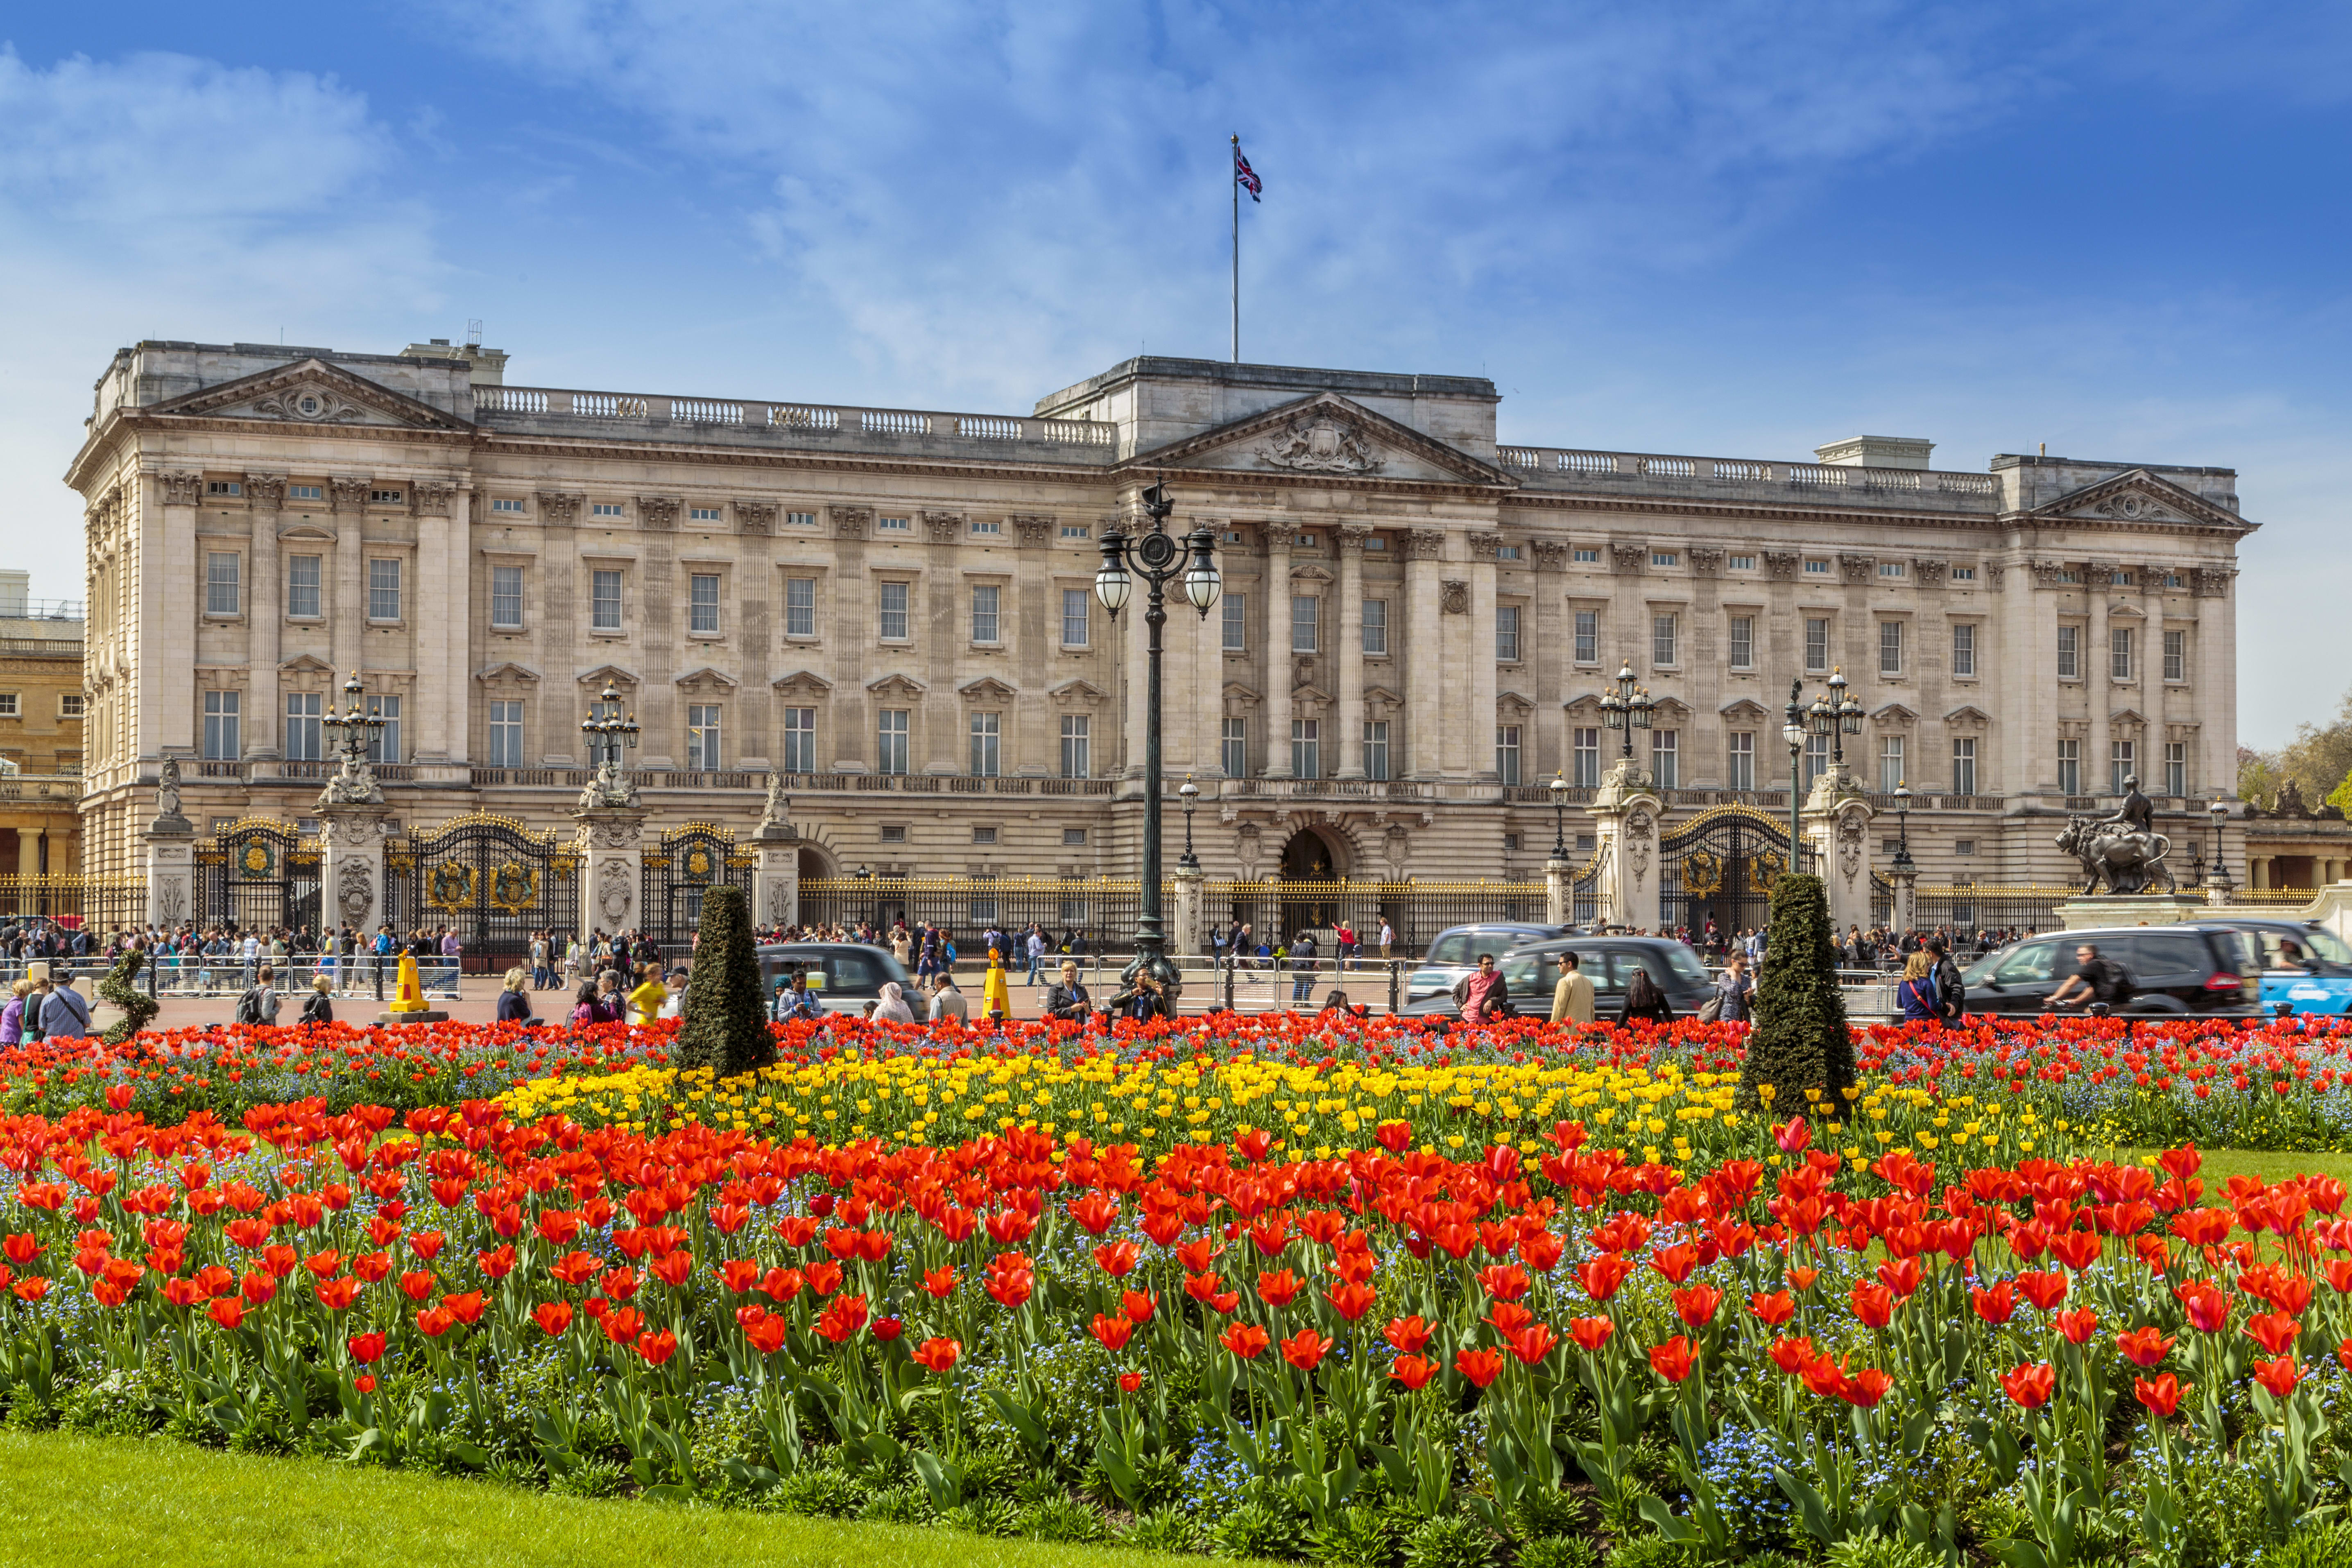 Buckingham Palace with red tulips in the foreground